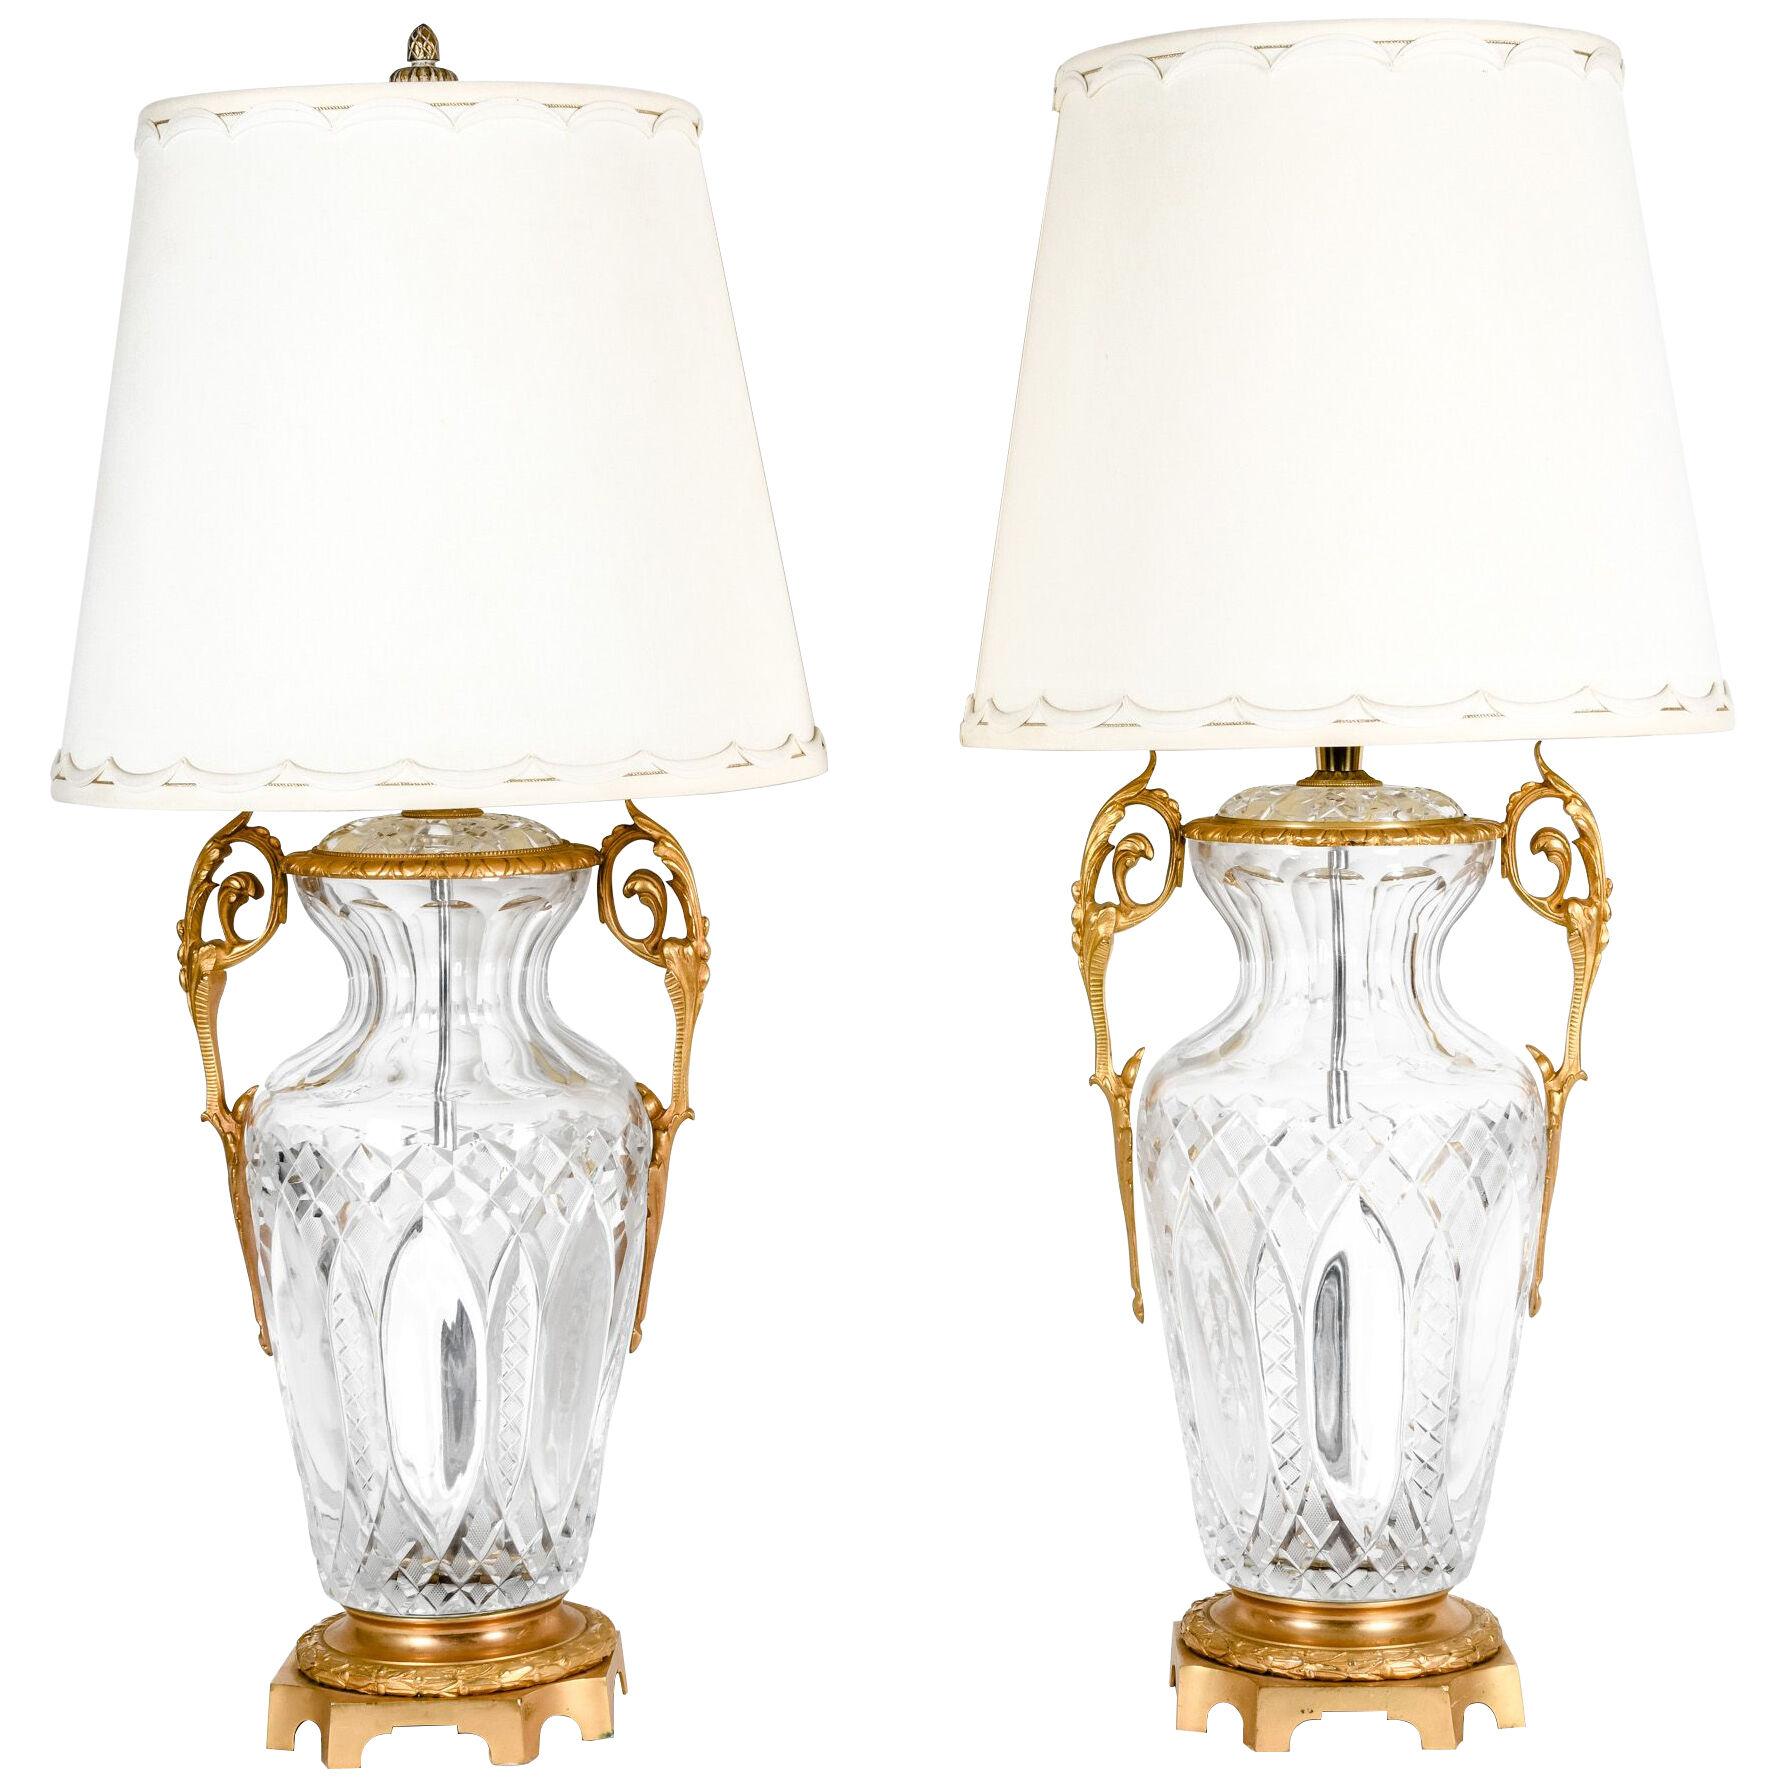 Bronze-Mounted Cut Crystal Pair Early 19th Century Lamps